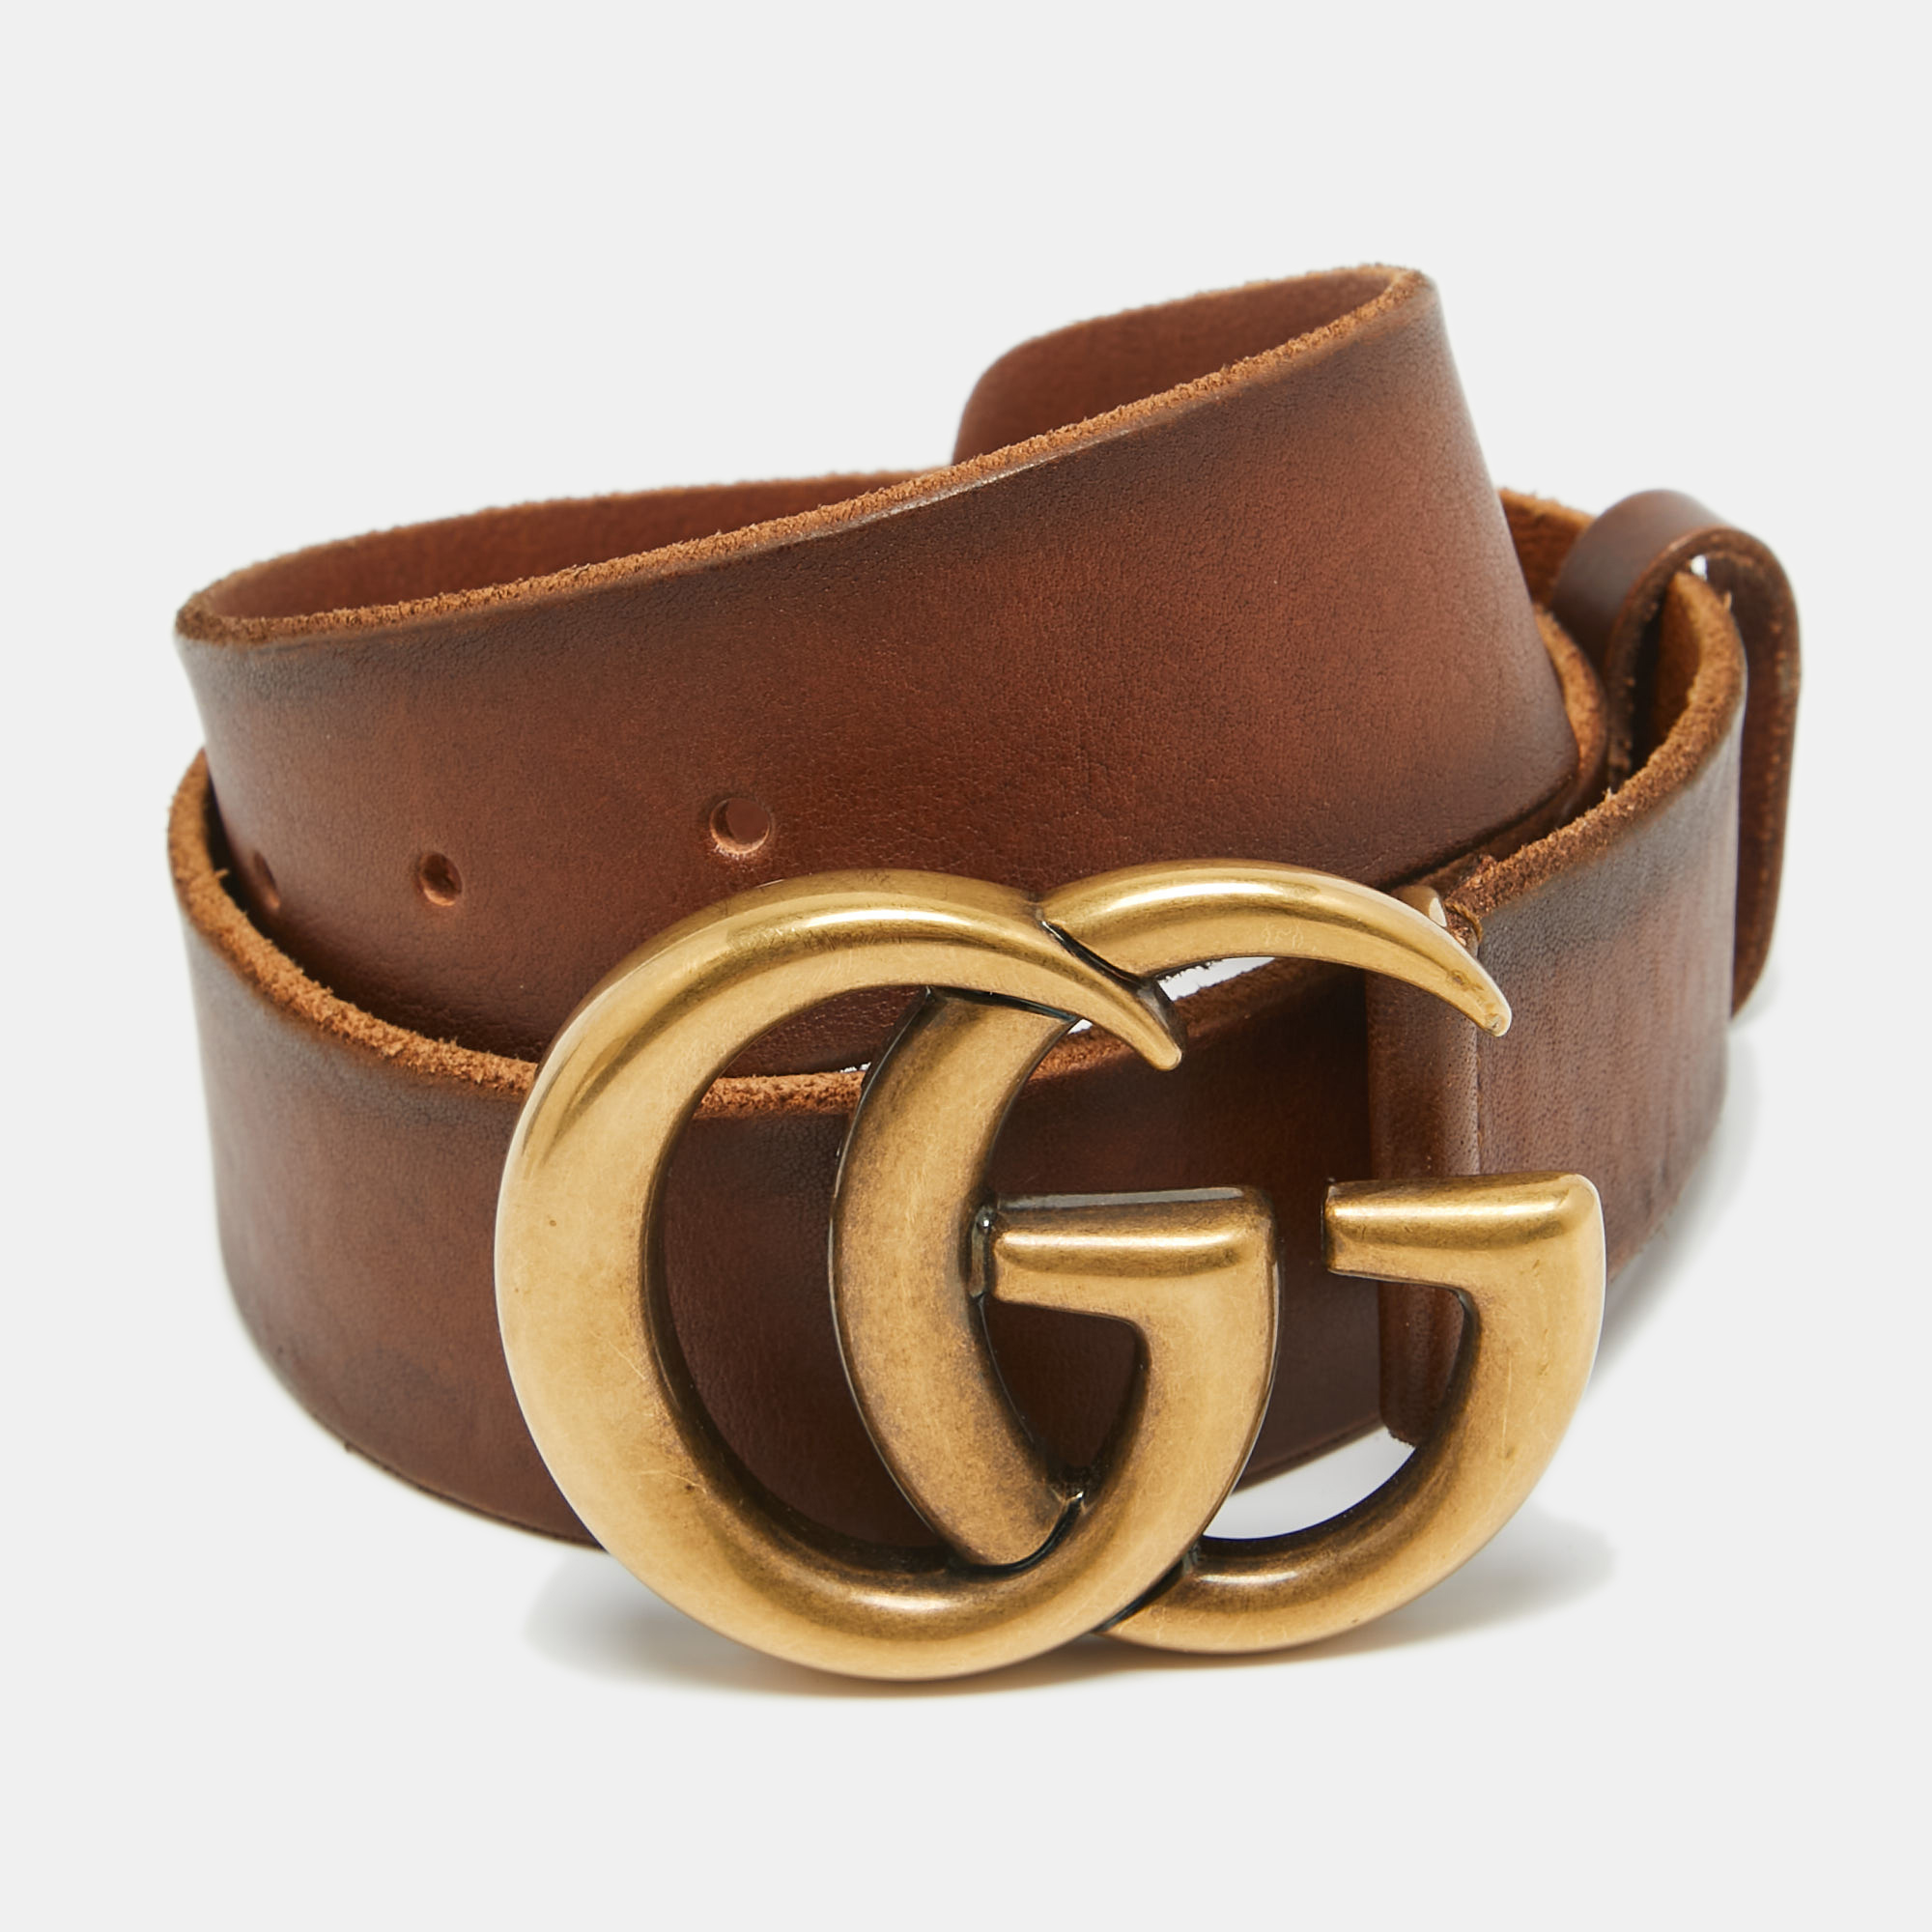 Gucci brown faded leather double g buckle belt 65 cm